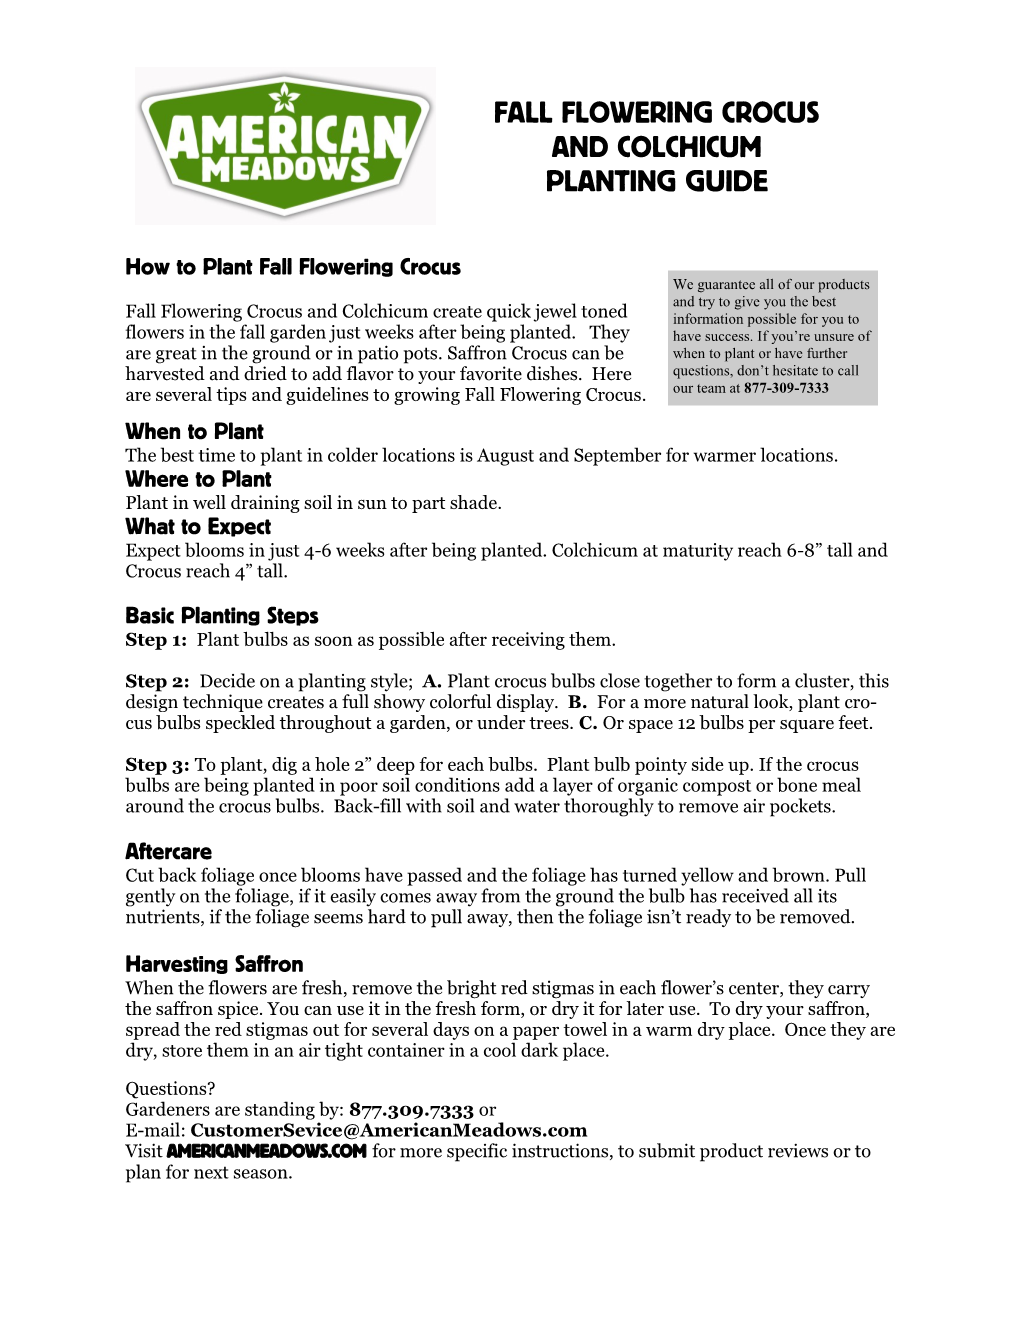 Fall Flowering Crocus and Colchicum Planting Guide